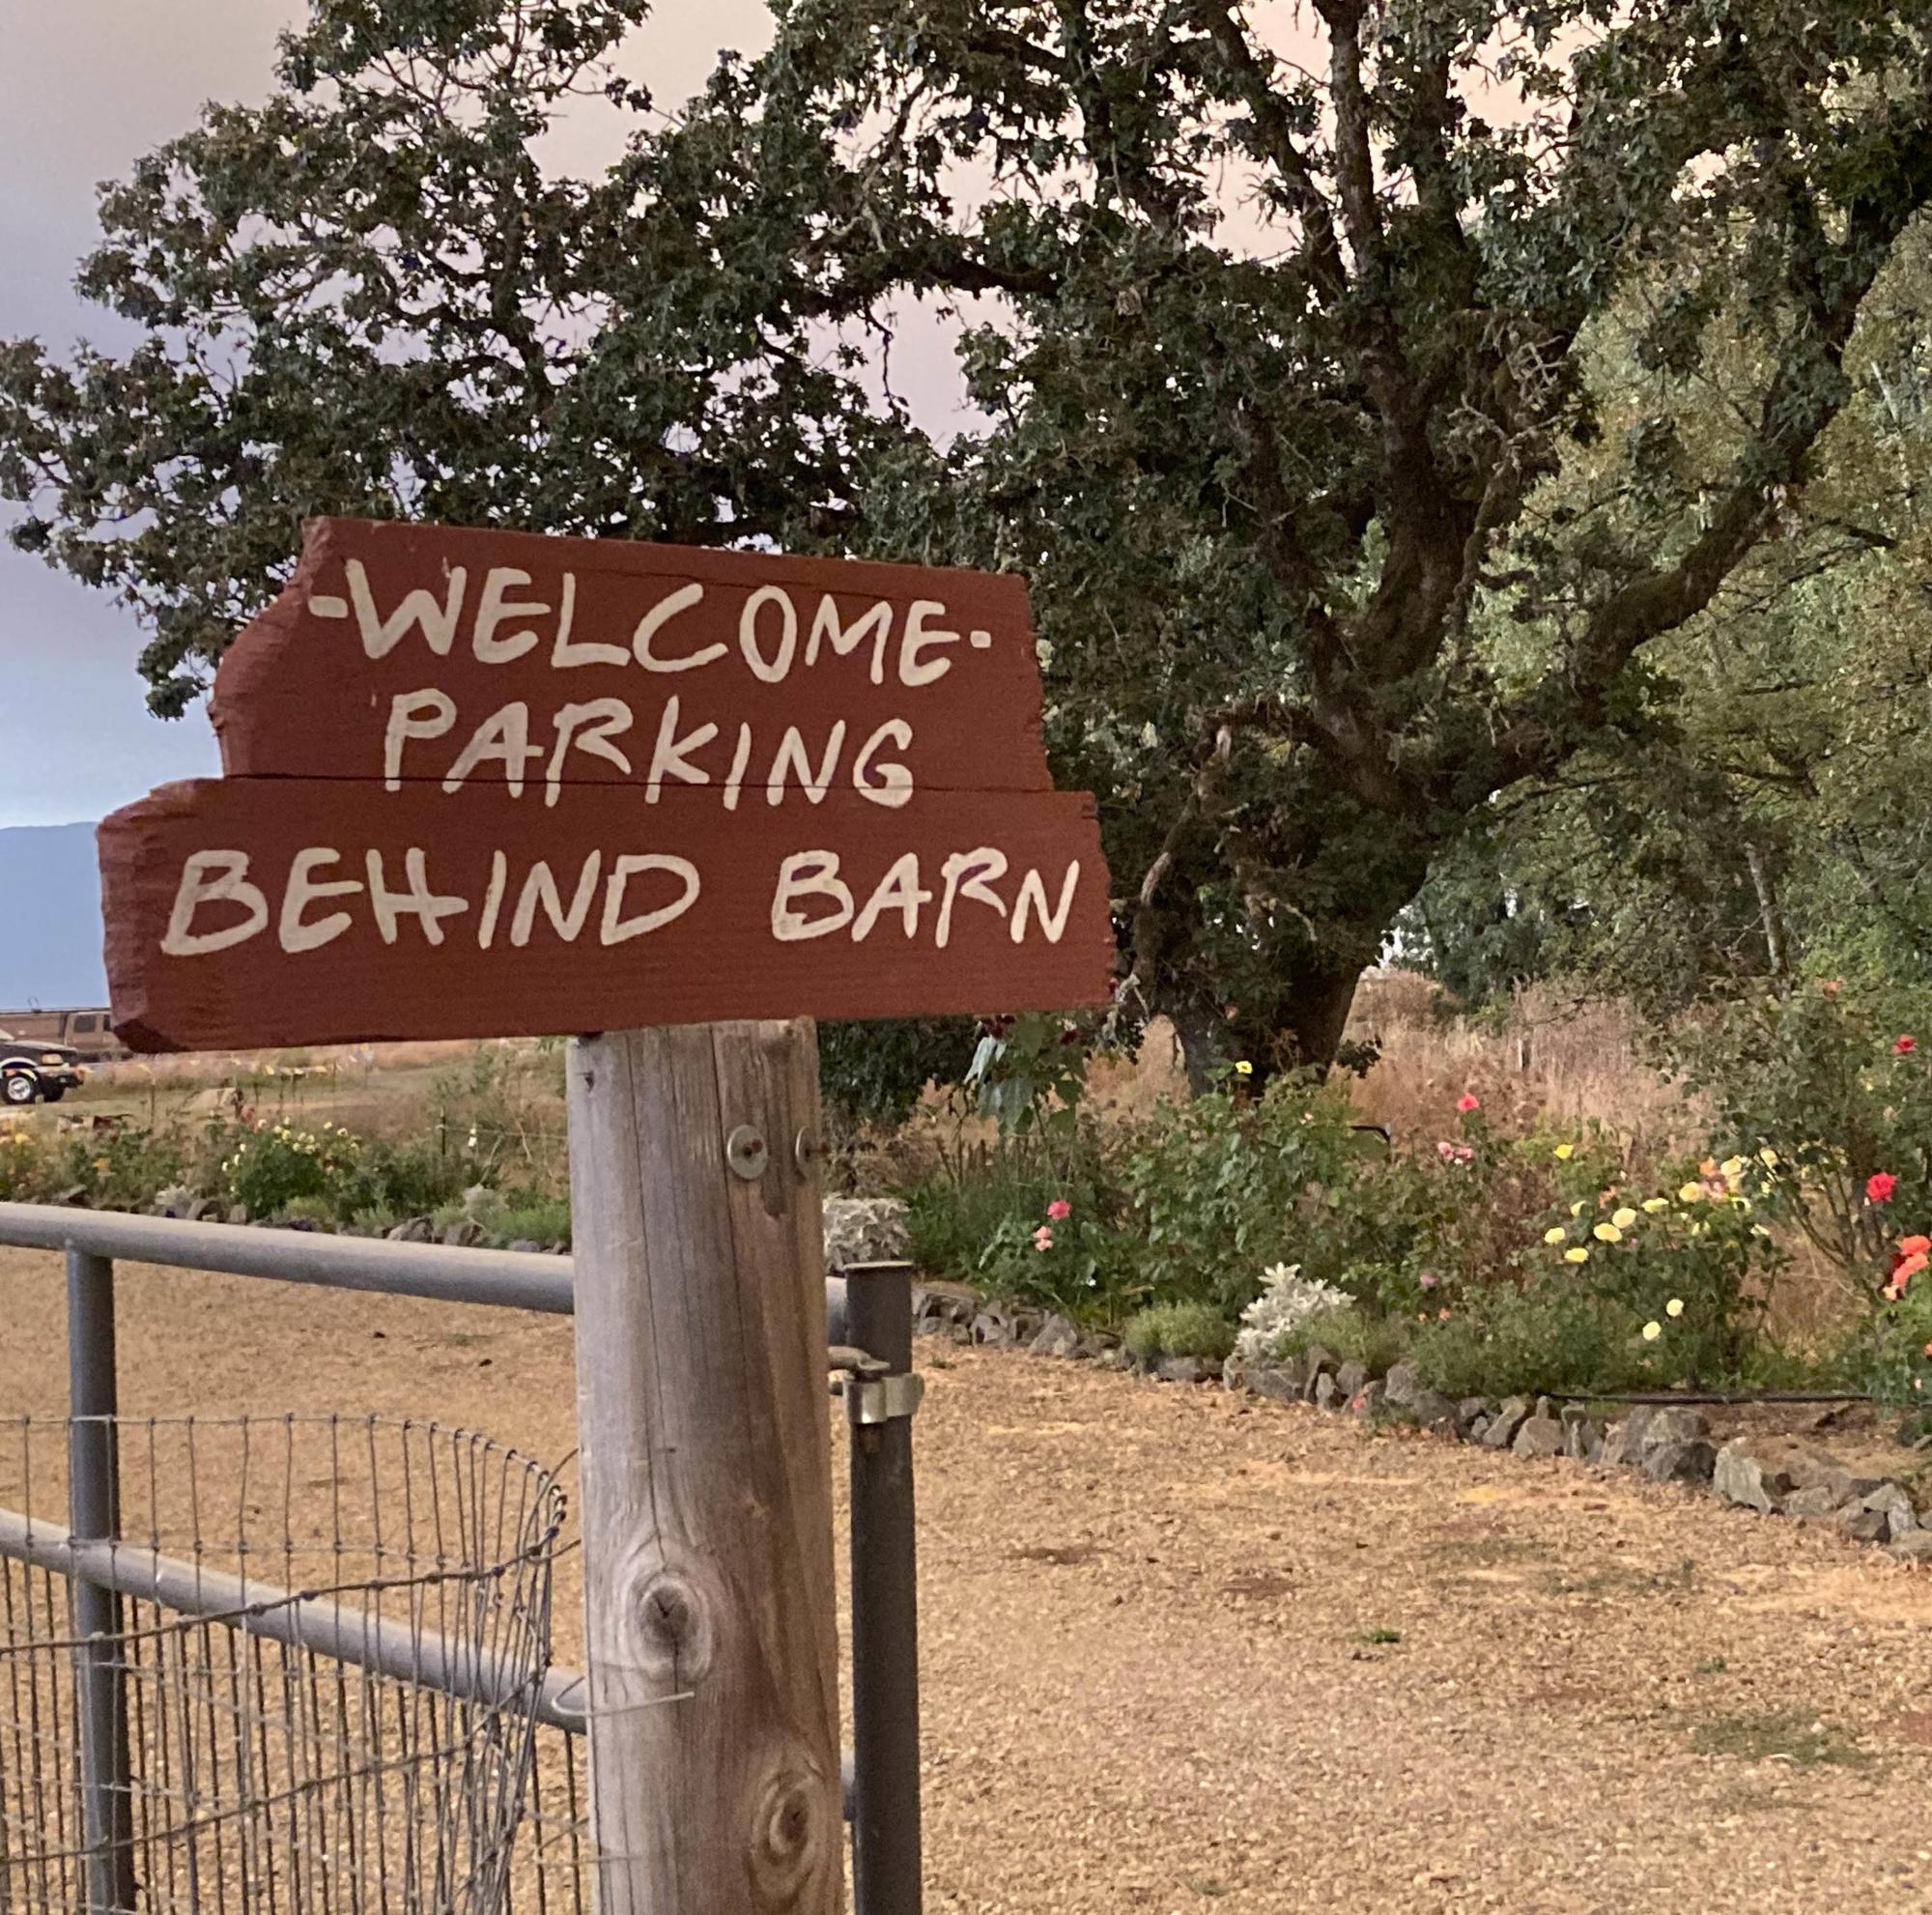 Sign reading Welcome — Parking Behind Barn on top of a post next to a dirt road. Tree and flowers in background.